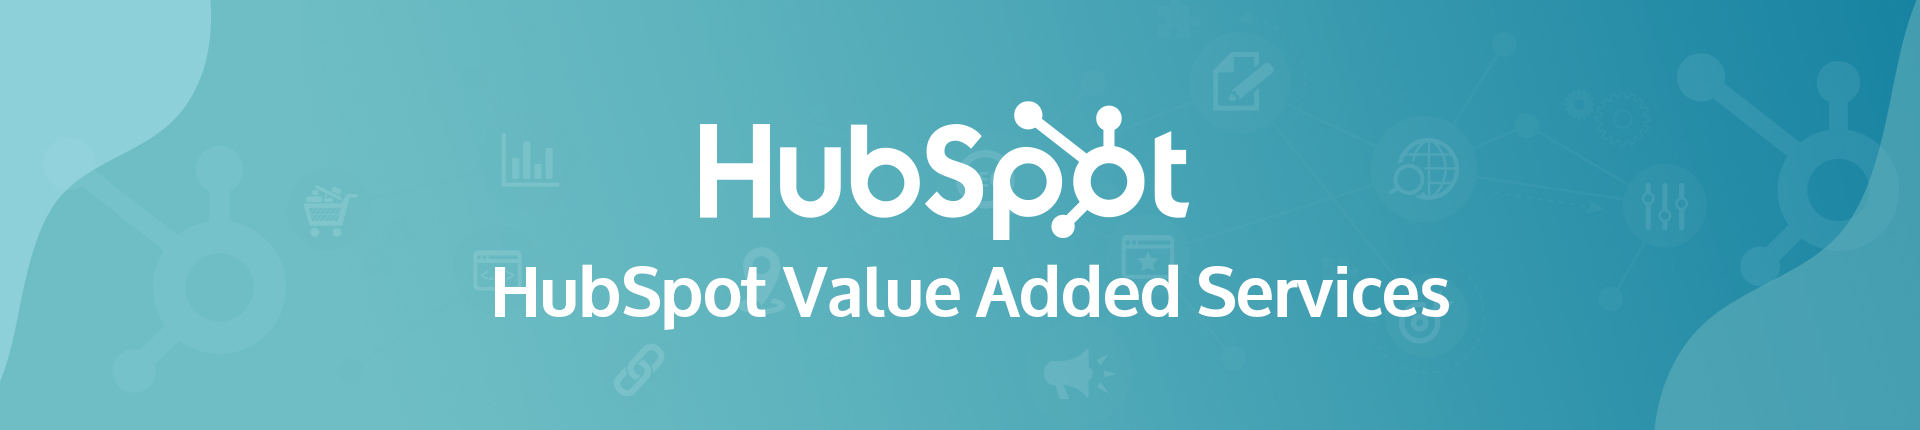 HubSpot Discounts and Ways to save banner